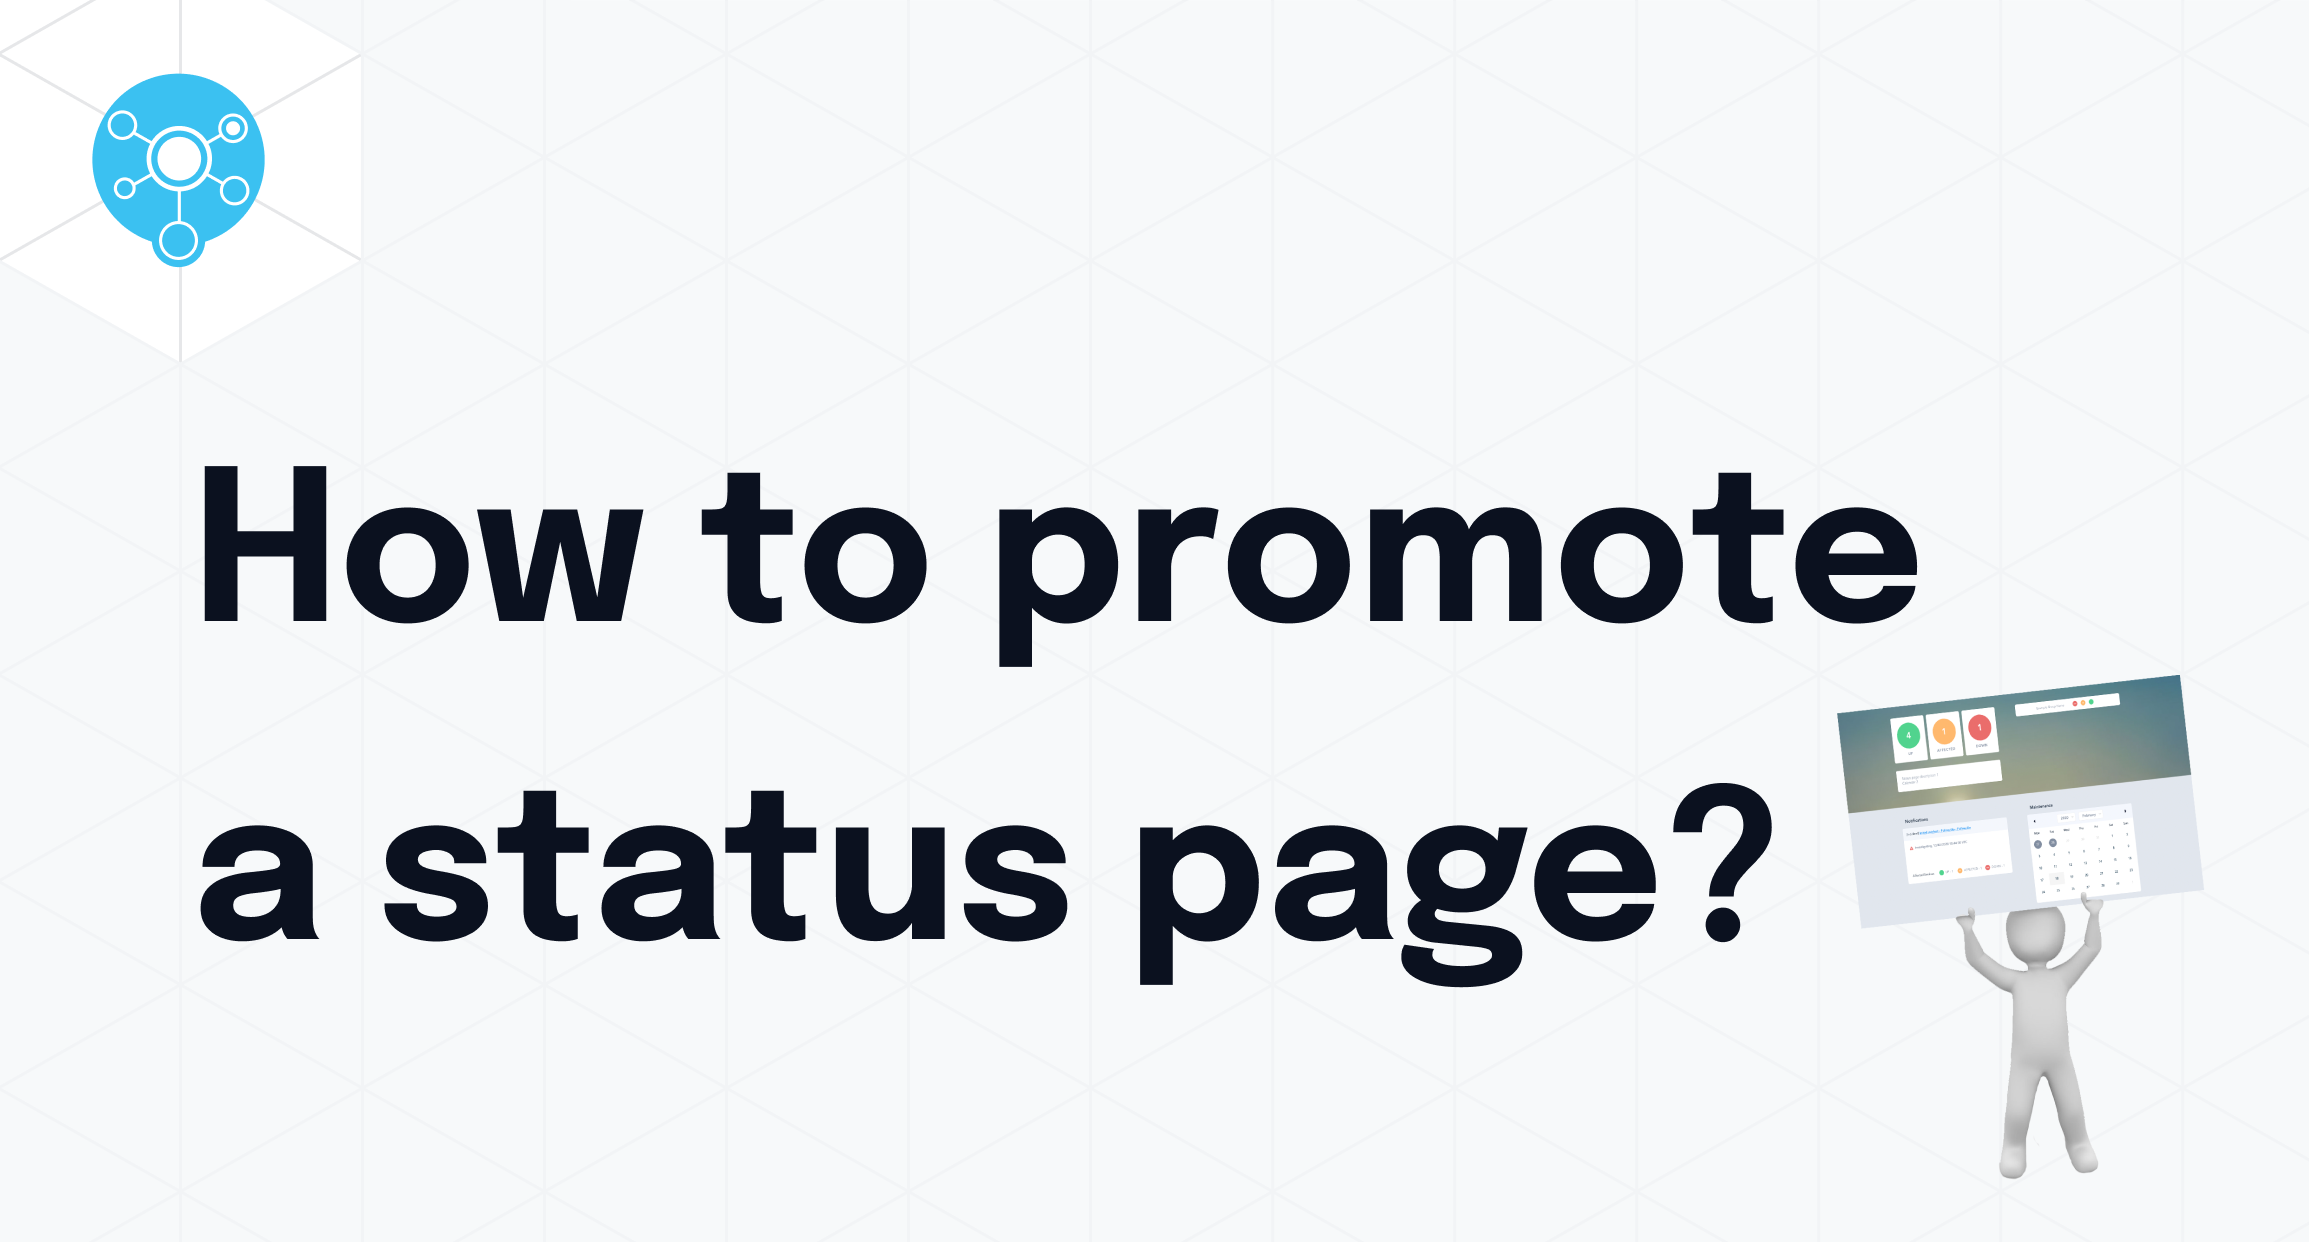 Promote a status page to your customers